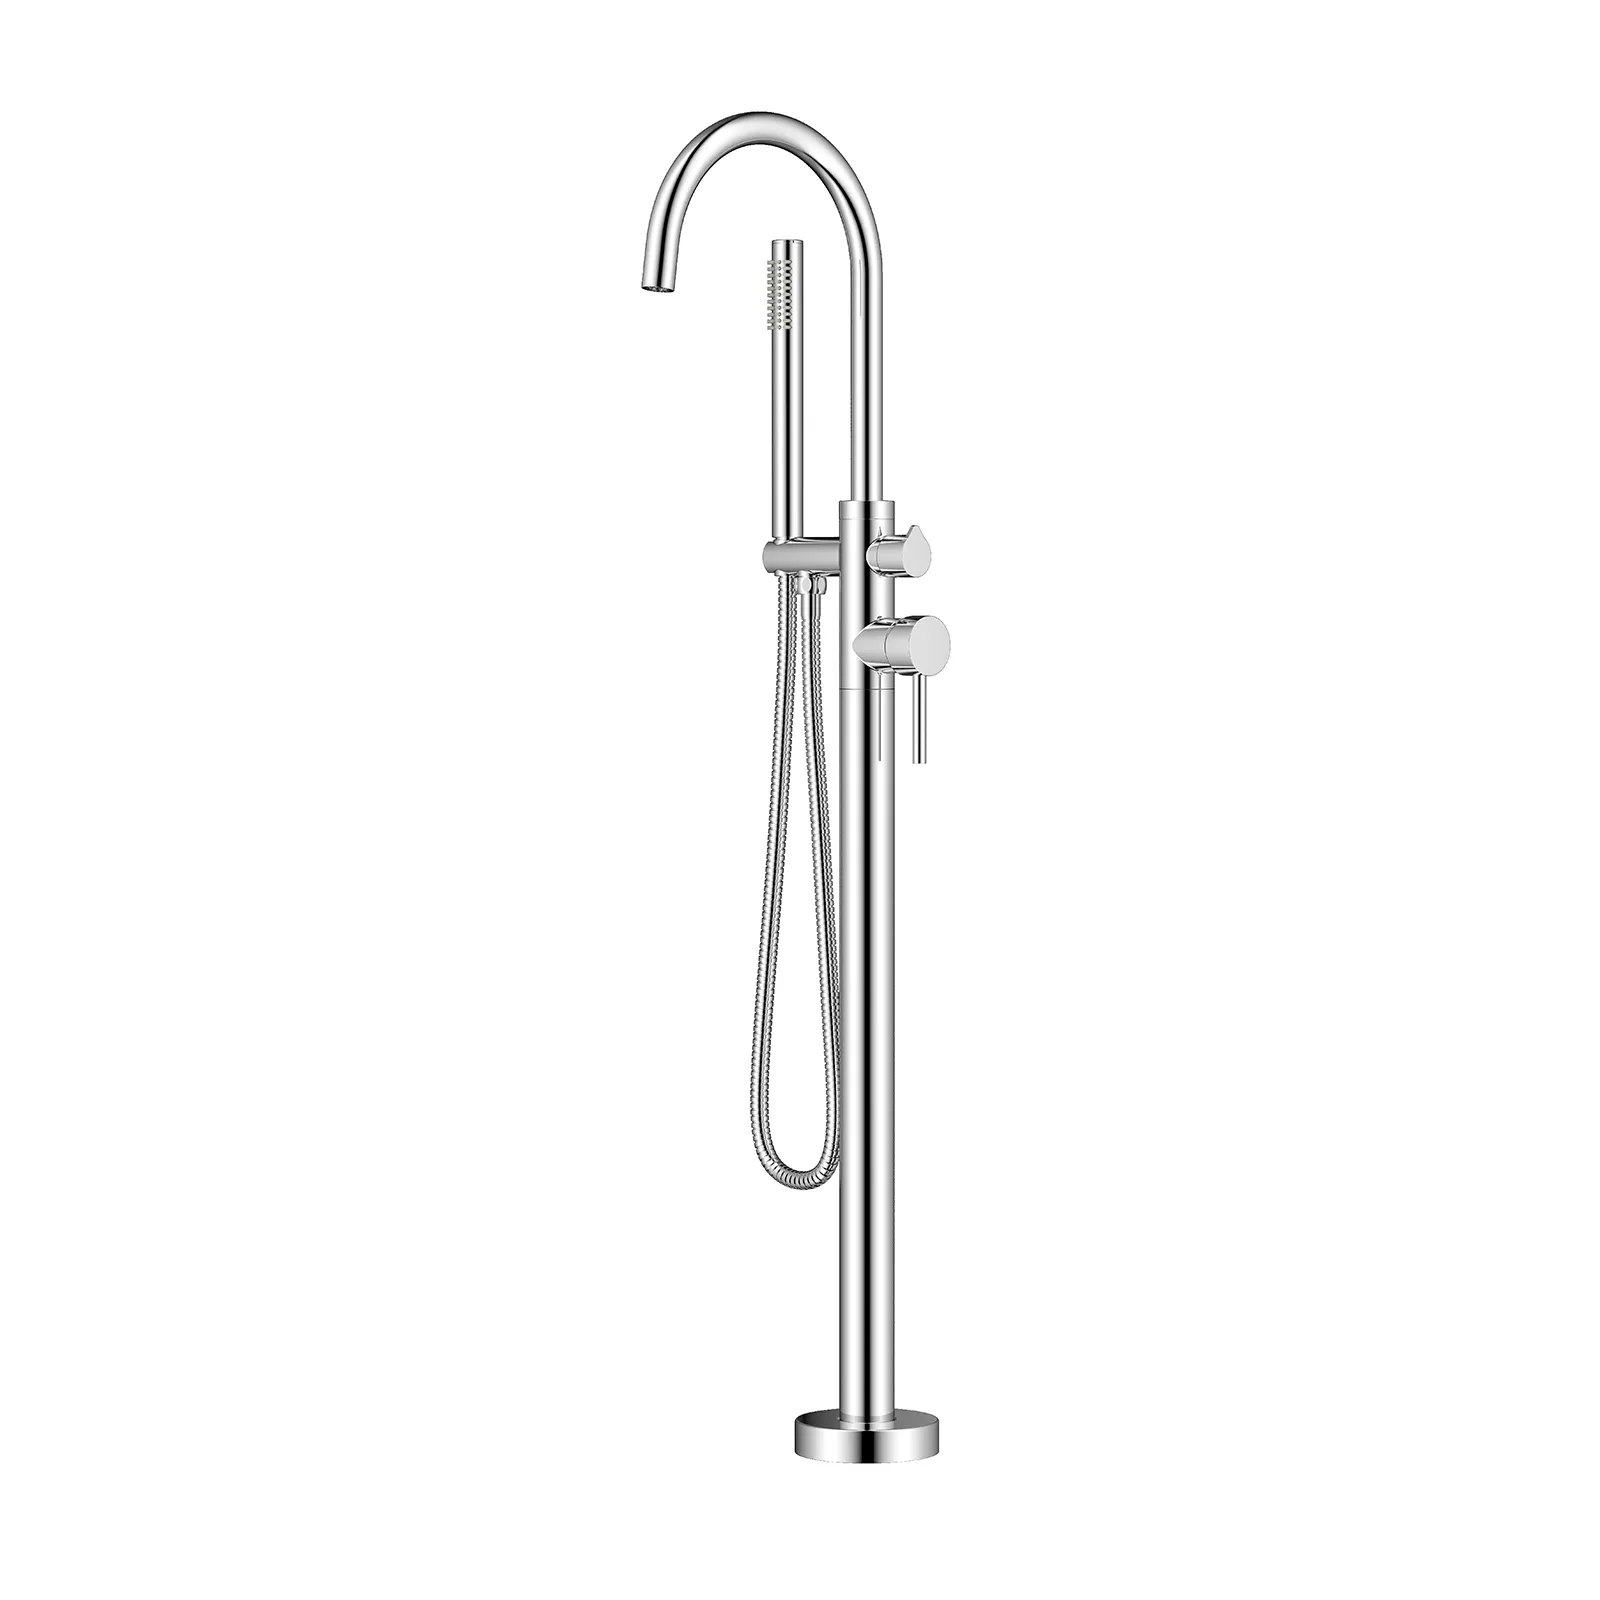 Freestanding Bathtub Faucet - Floor-mounted Free Standing Bath Shower Mixer Tub Filler Shower Mixer with Floor Stand